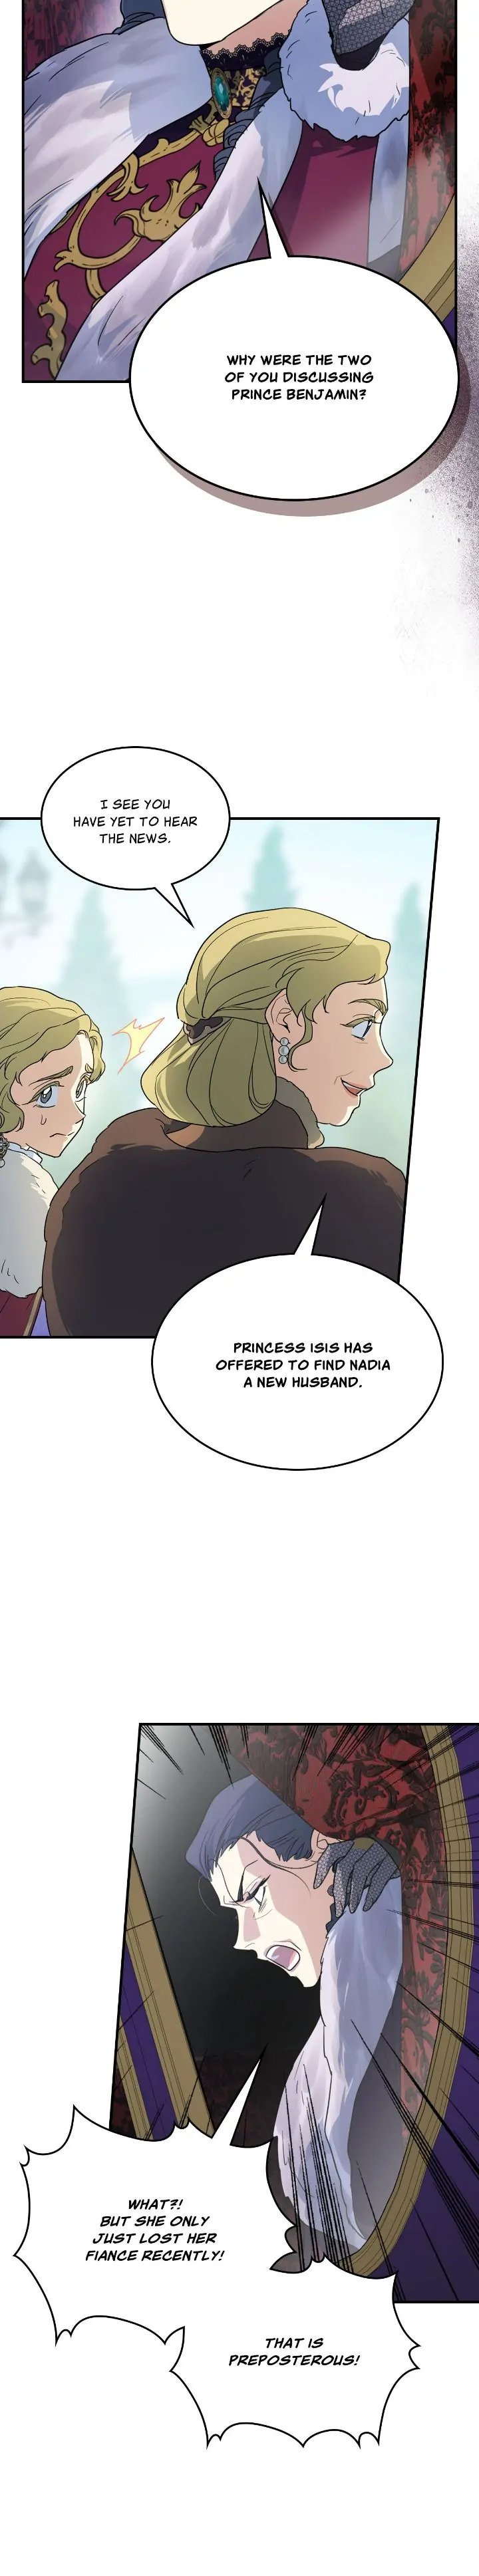 The Lady and the Beast - Chapter 138 Page 2